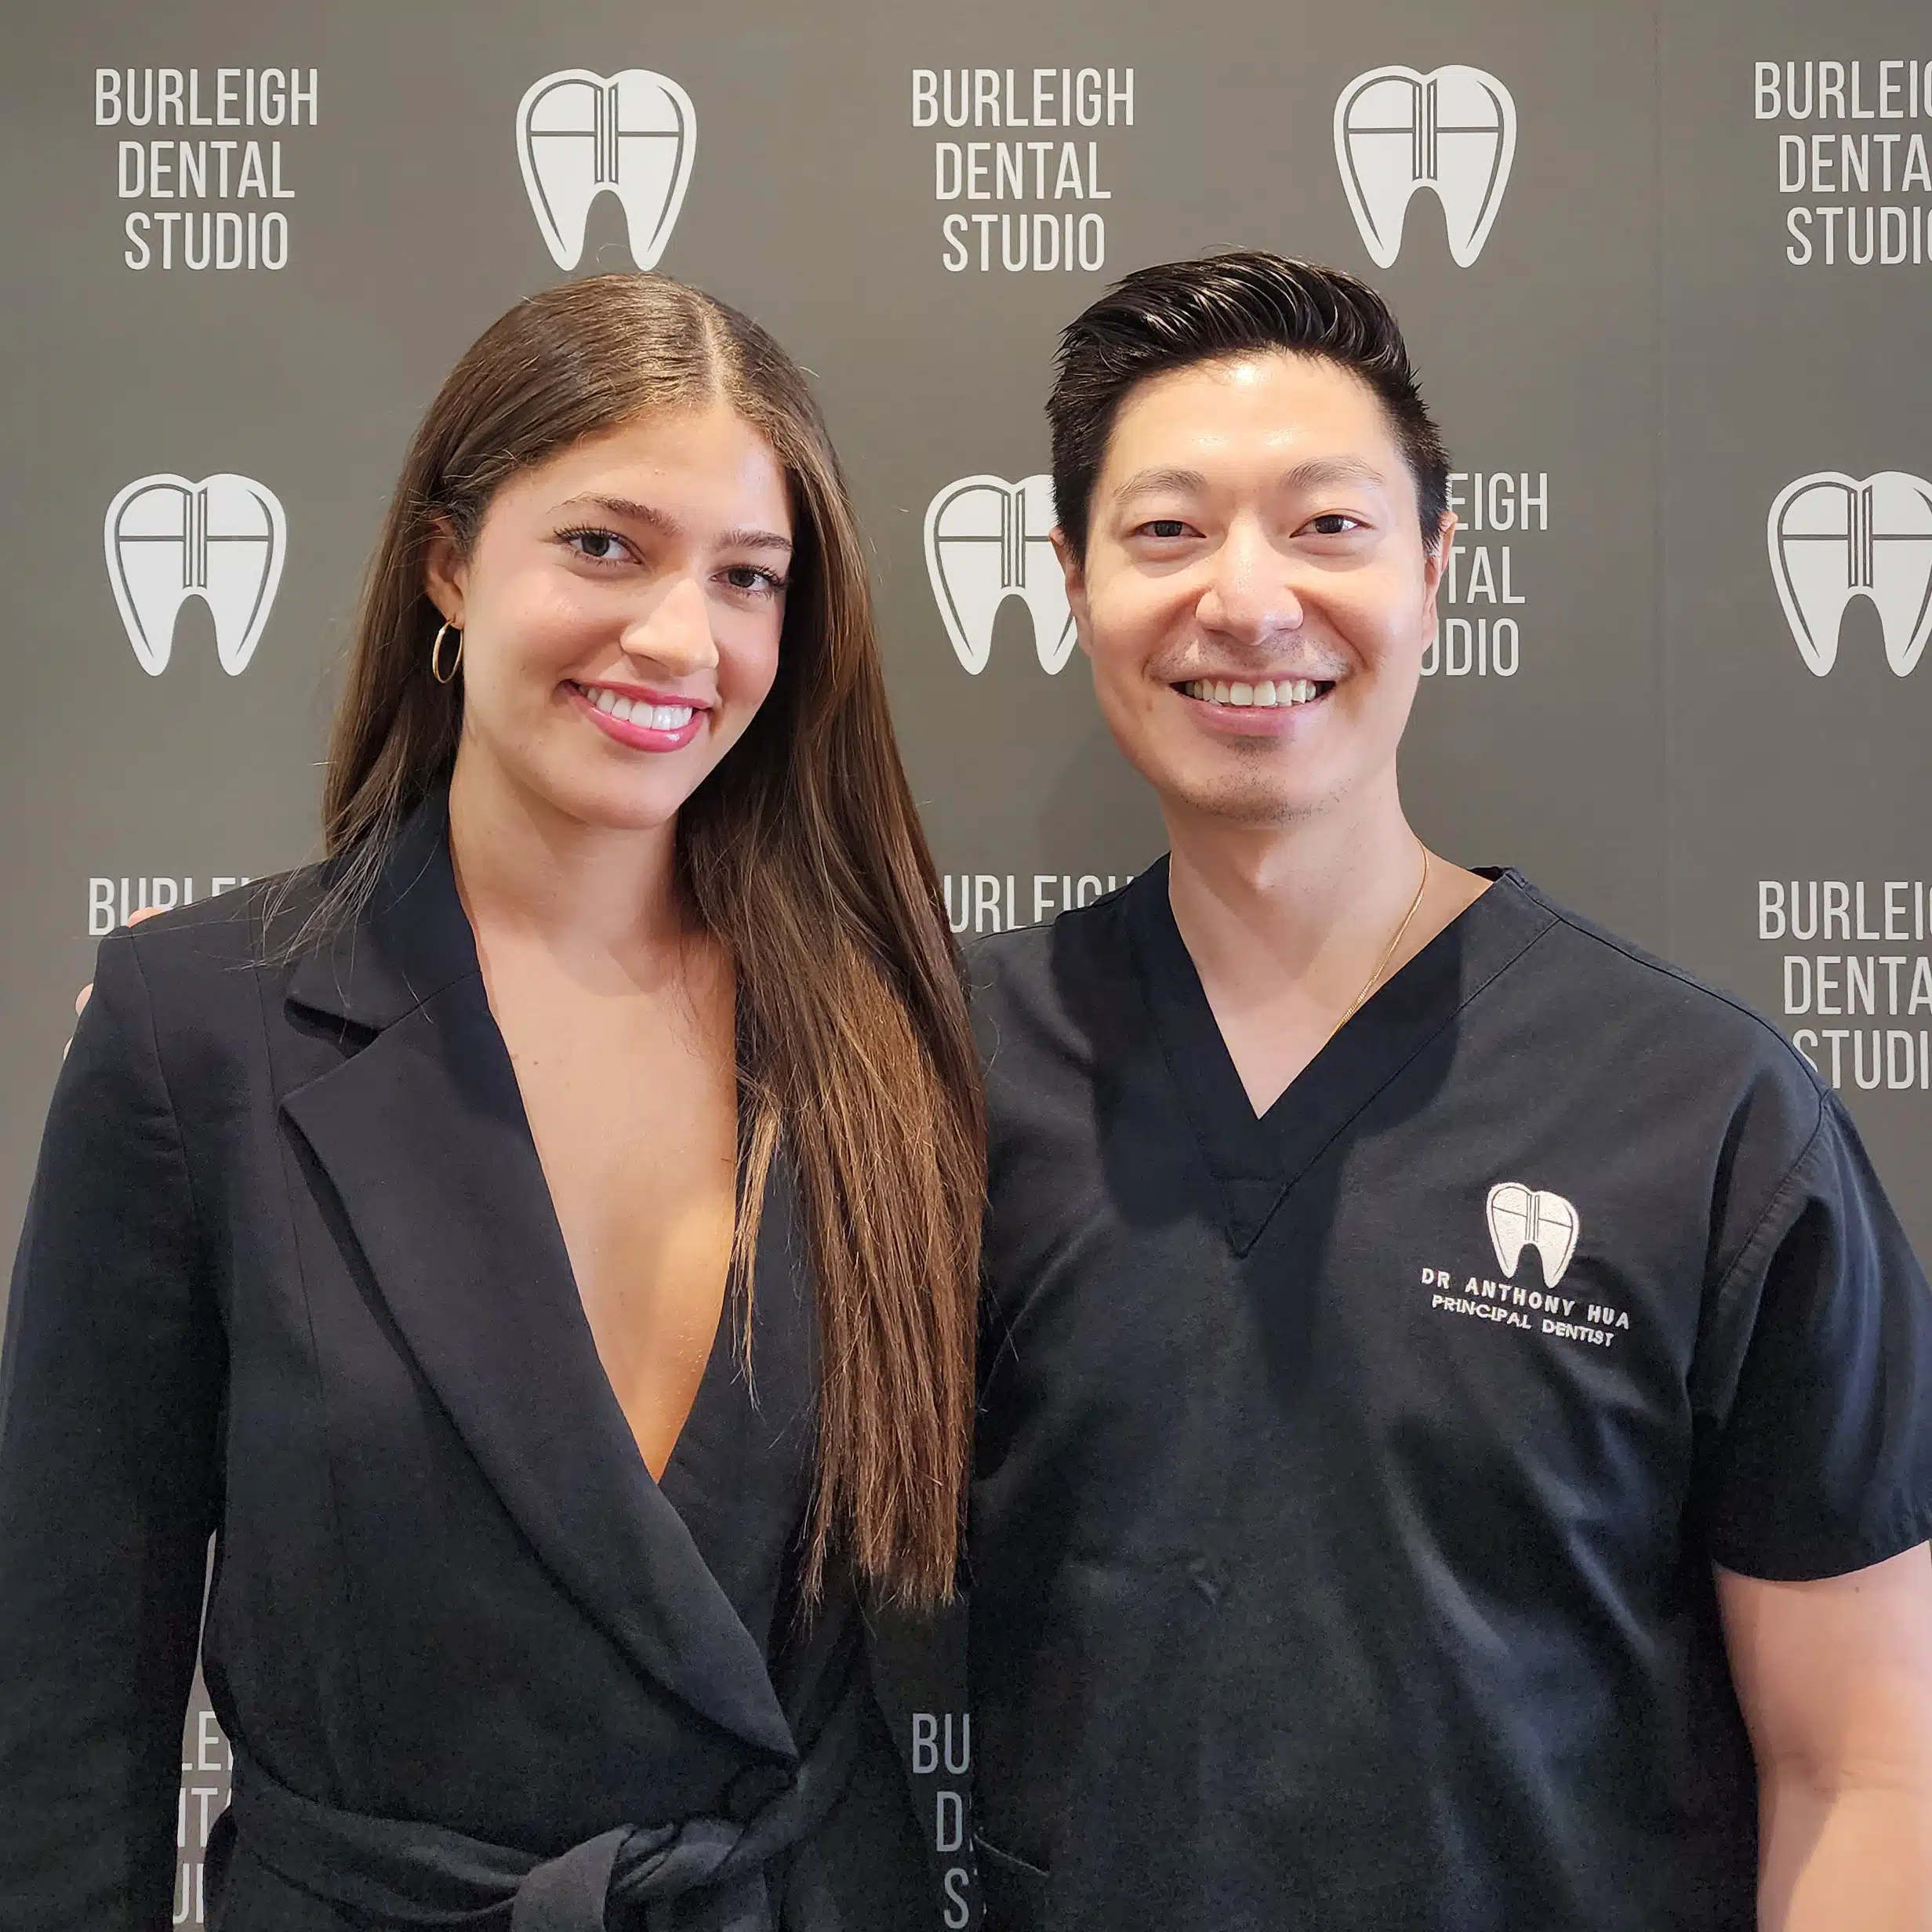 Happy Client 16 — Dentist In Burleigh Heads, QLD